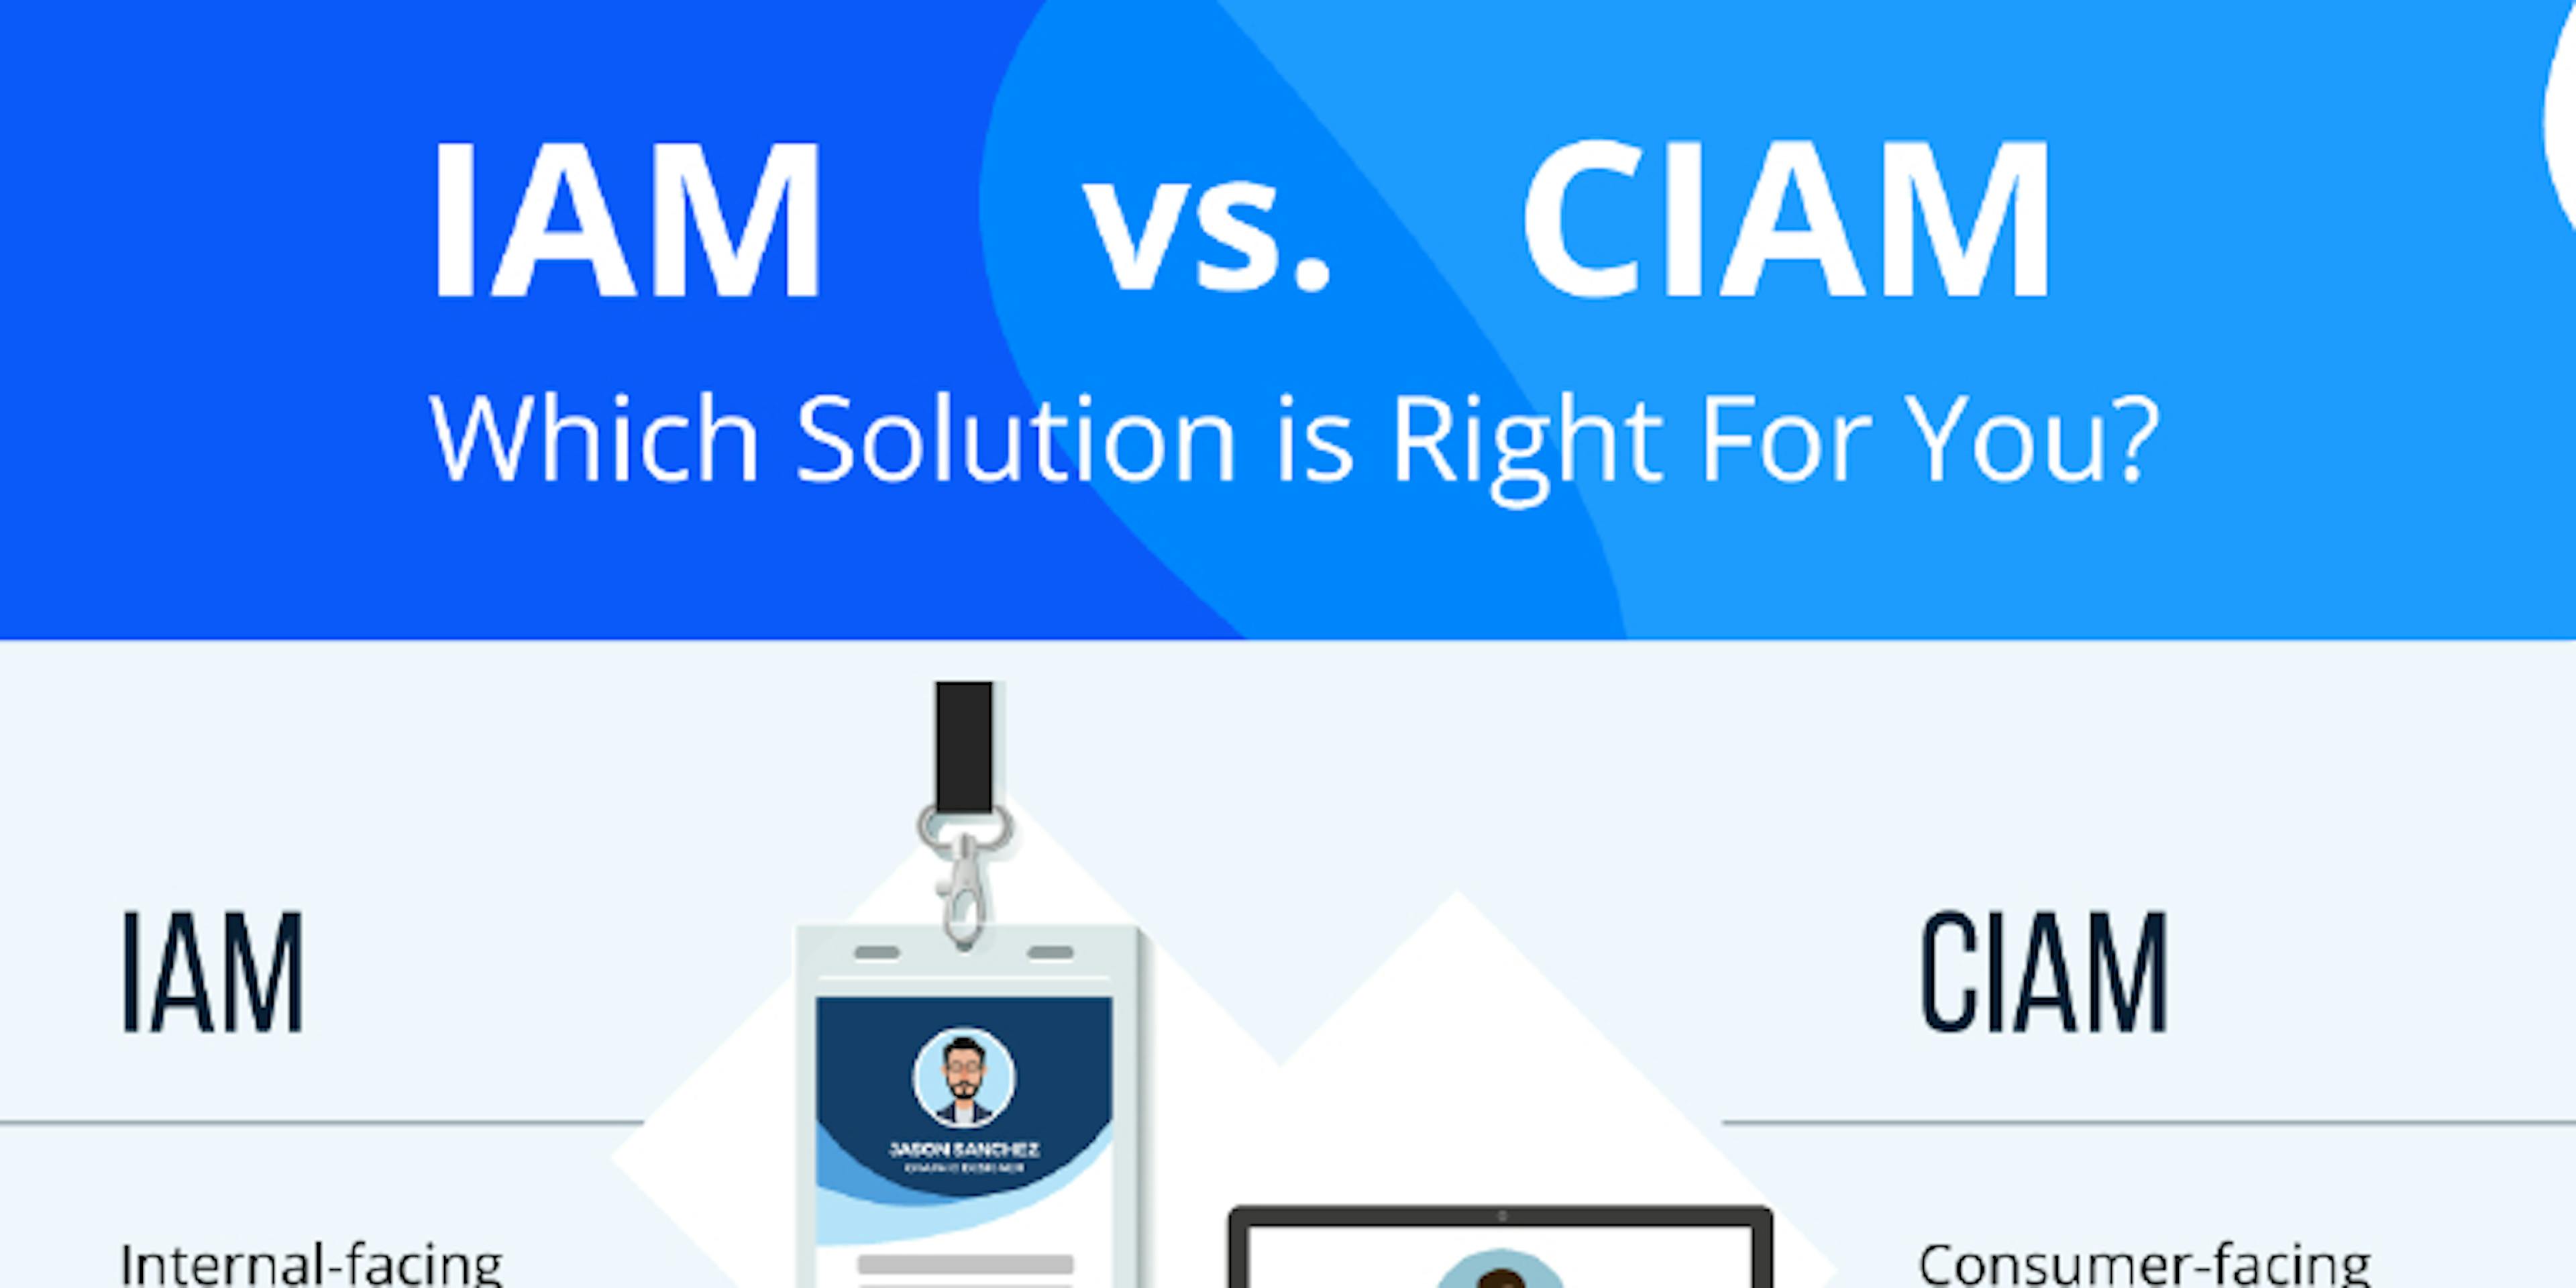 /iam-vs-ciam-infographic-which-one-is-better-for-your-enterprise-6fa32d70c176 feature image